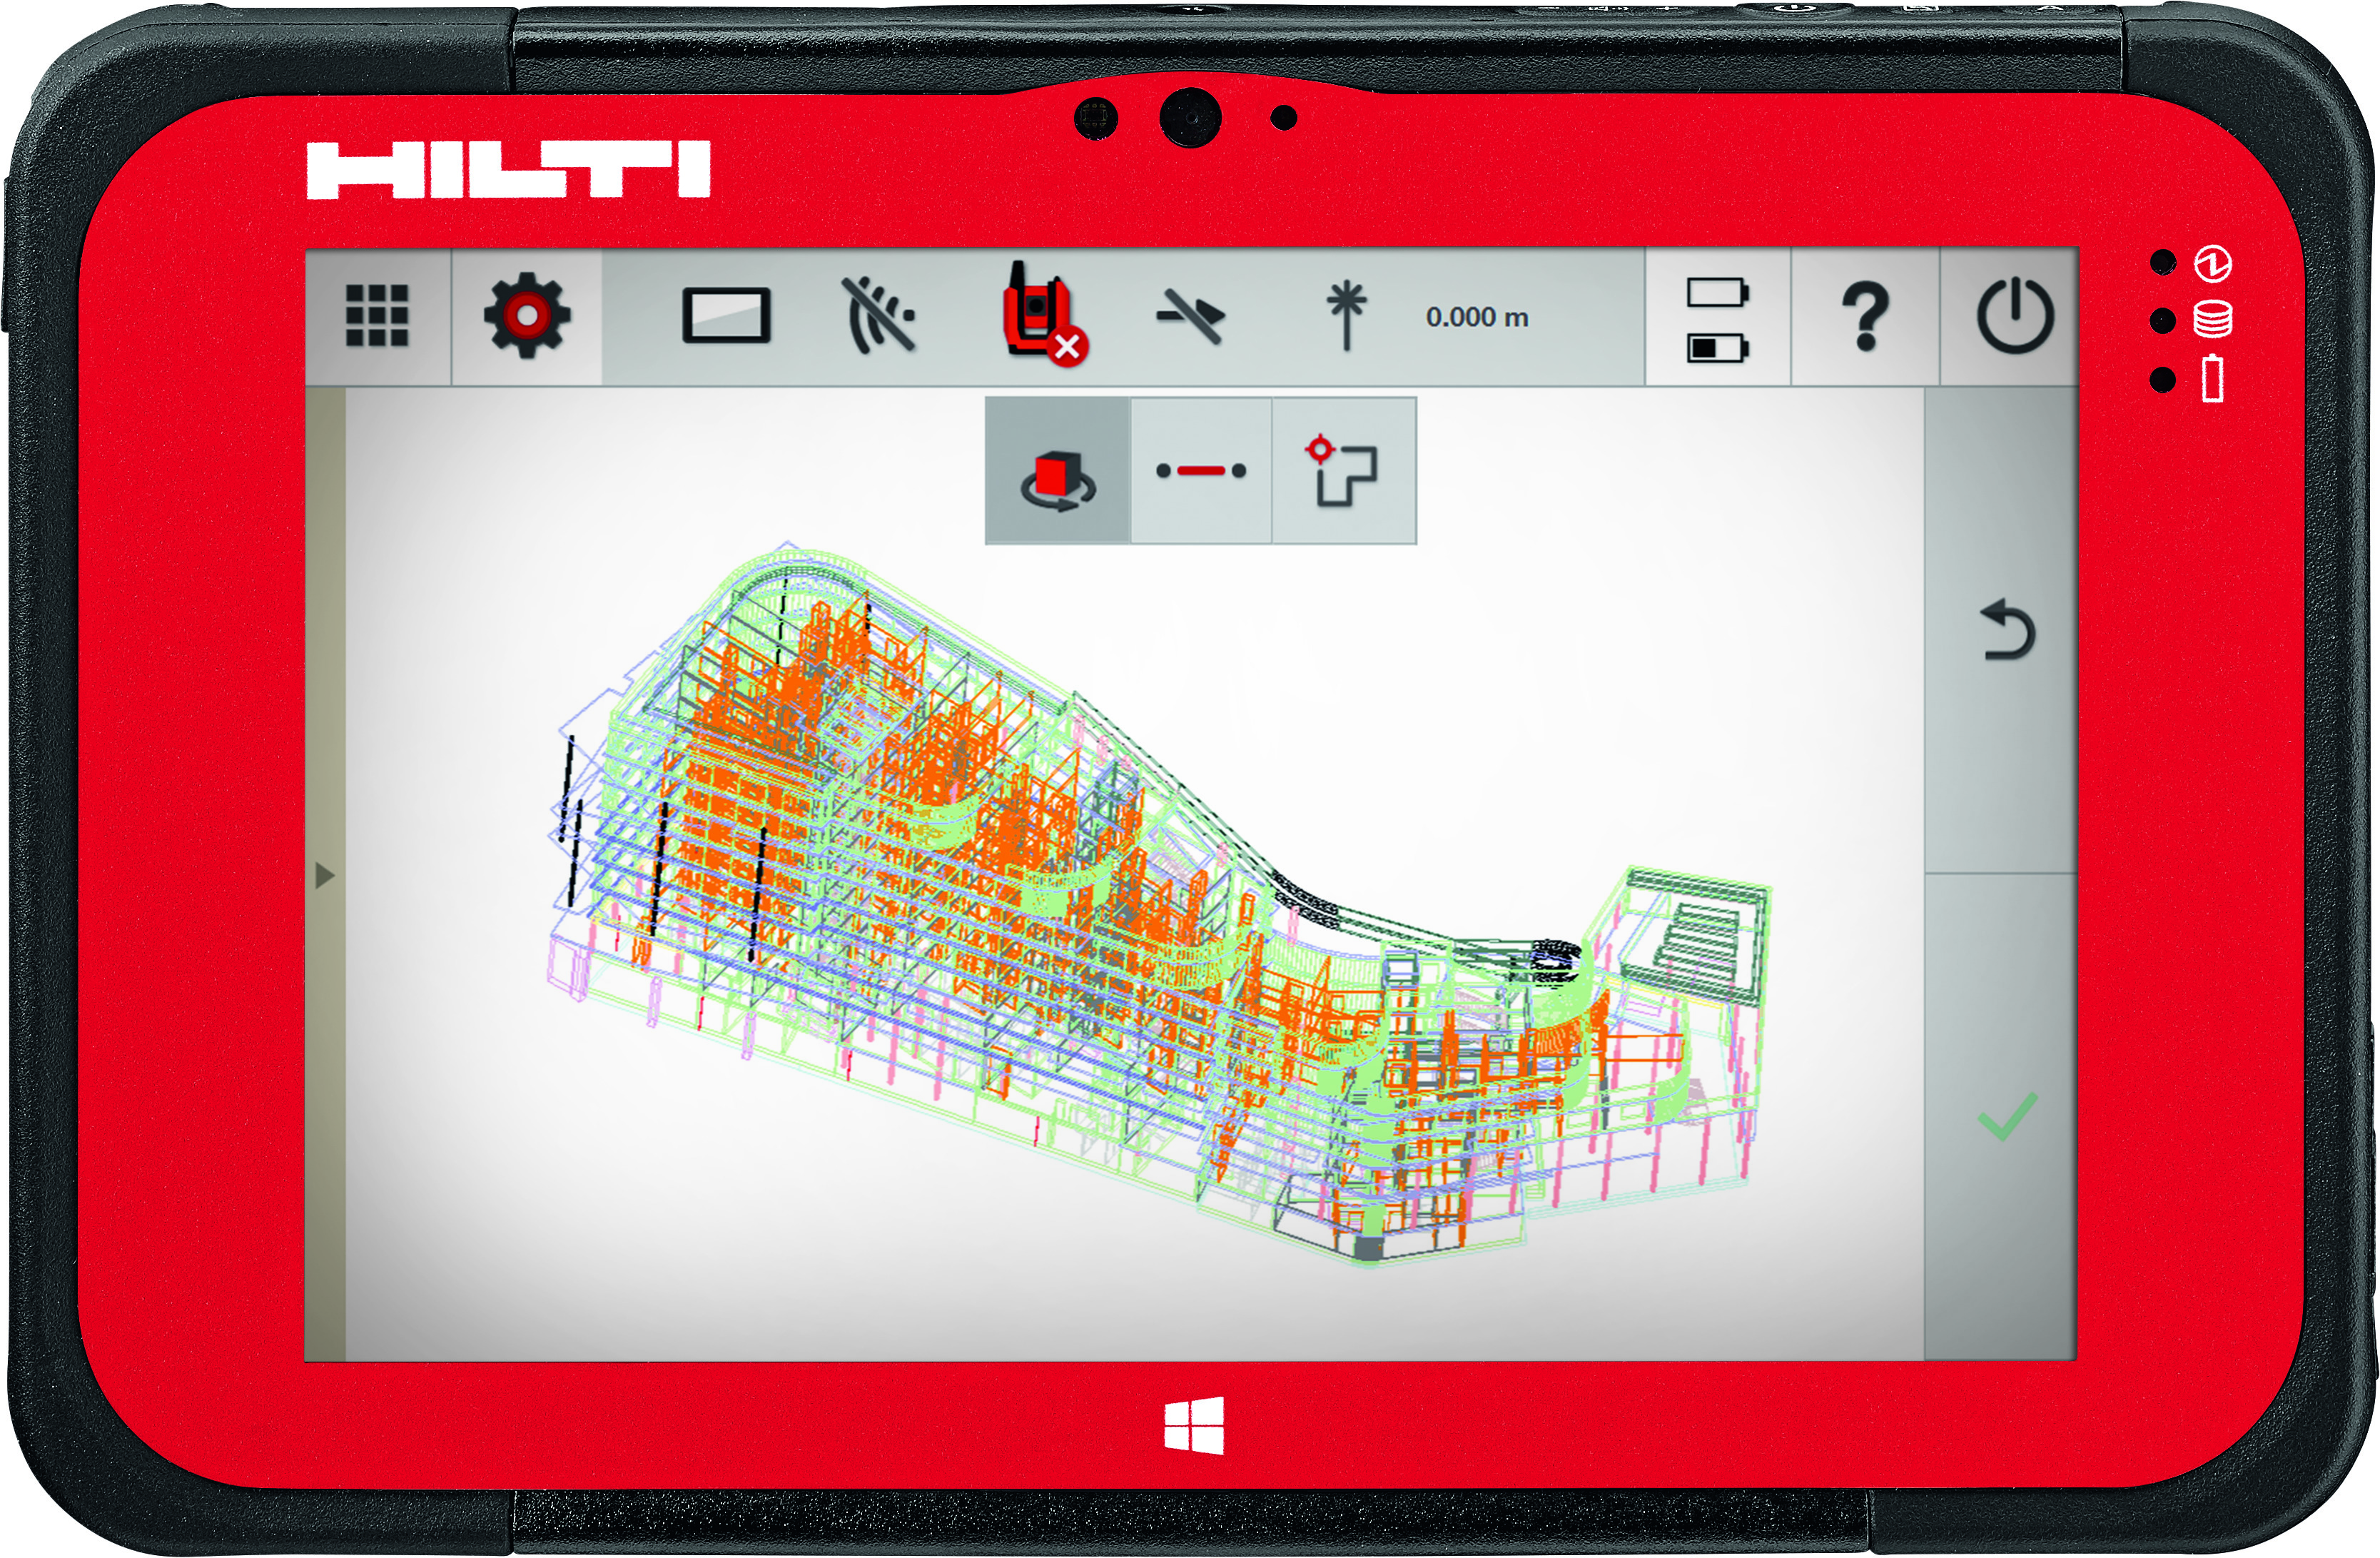 Hilti construction layout software